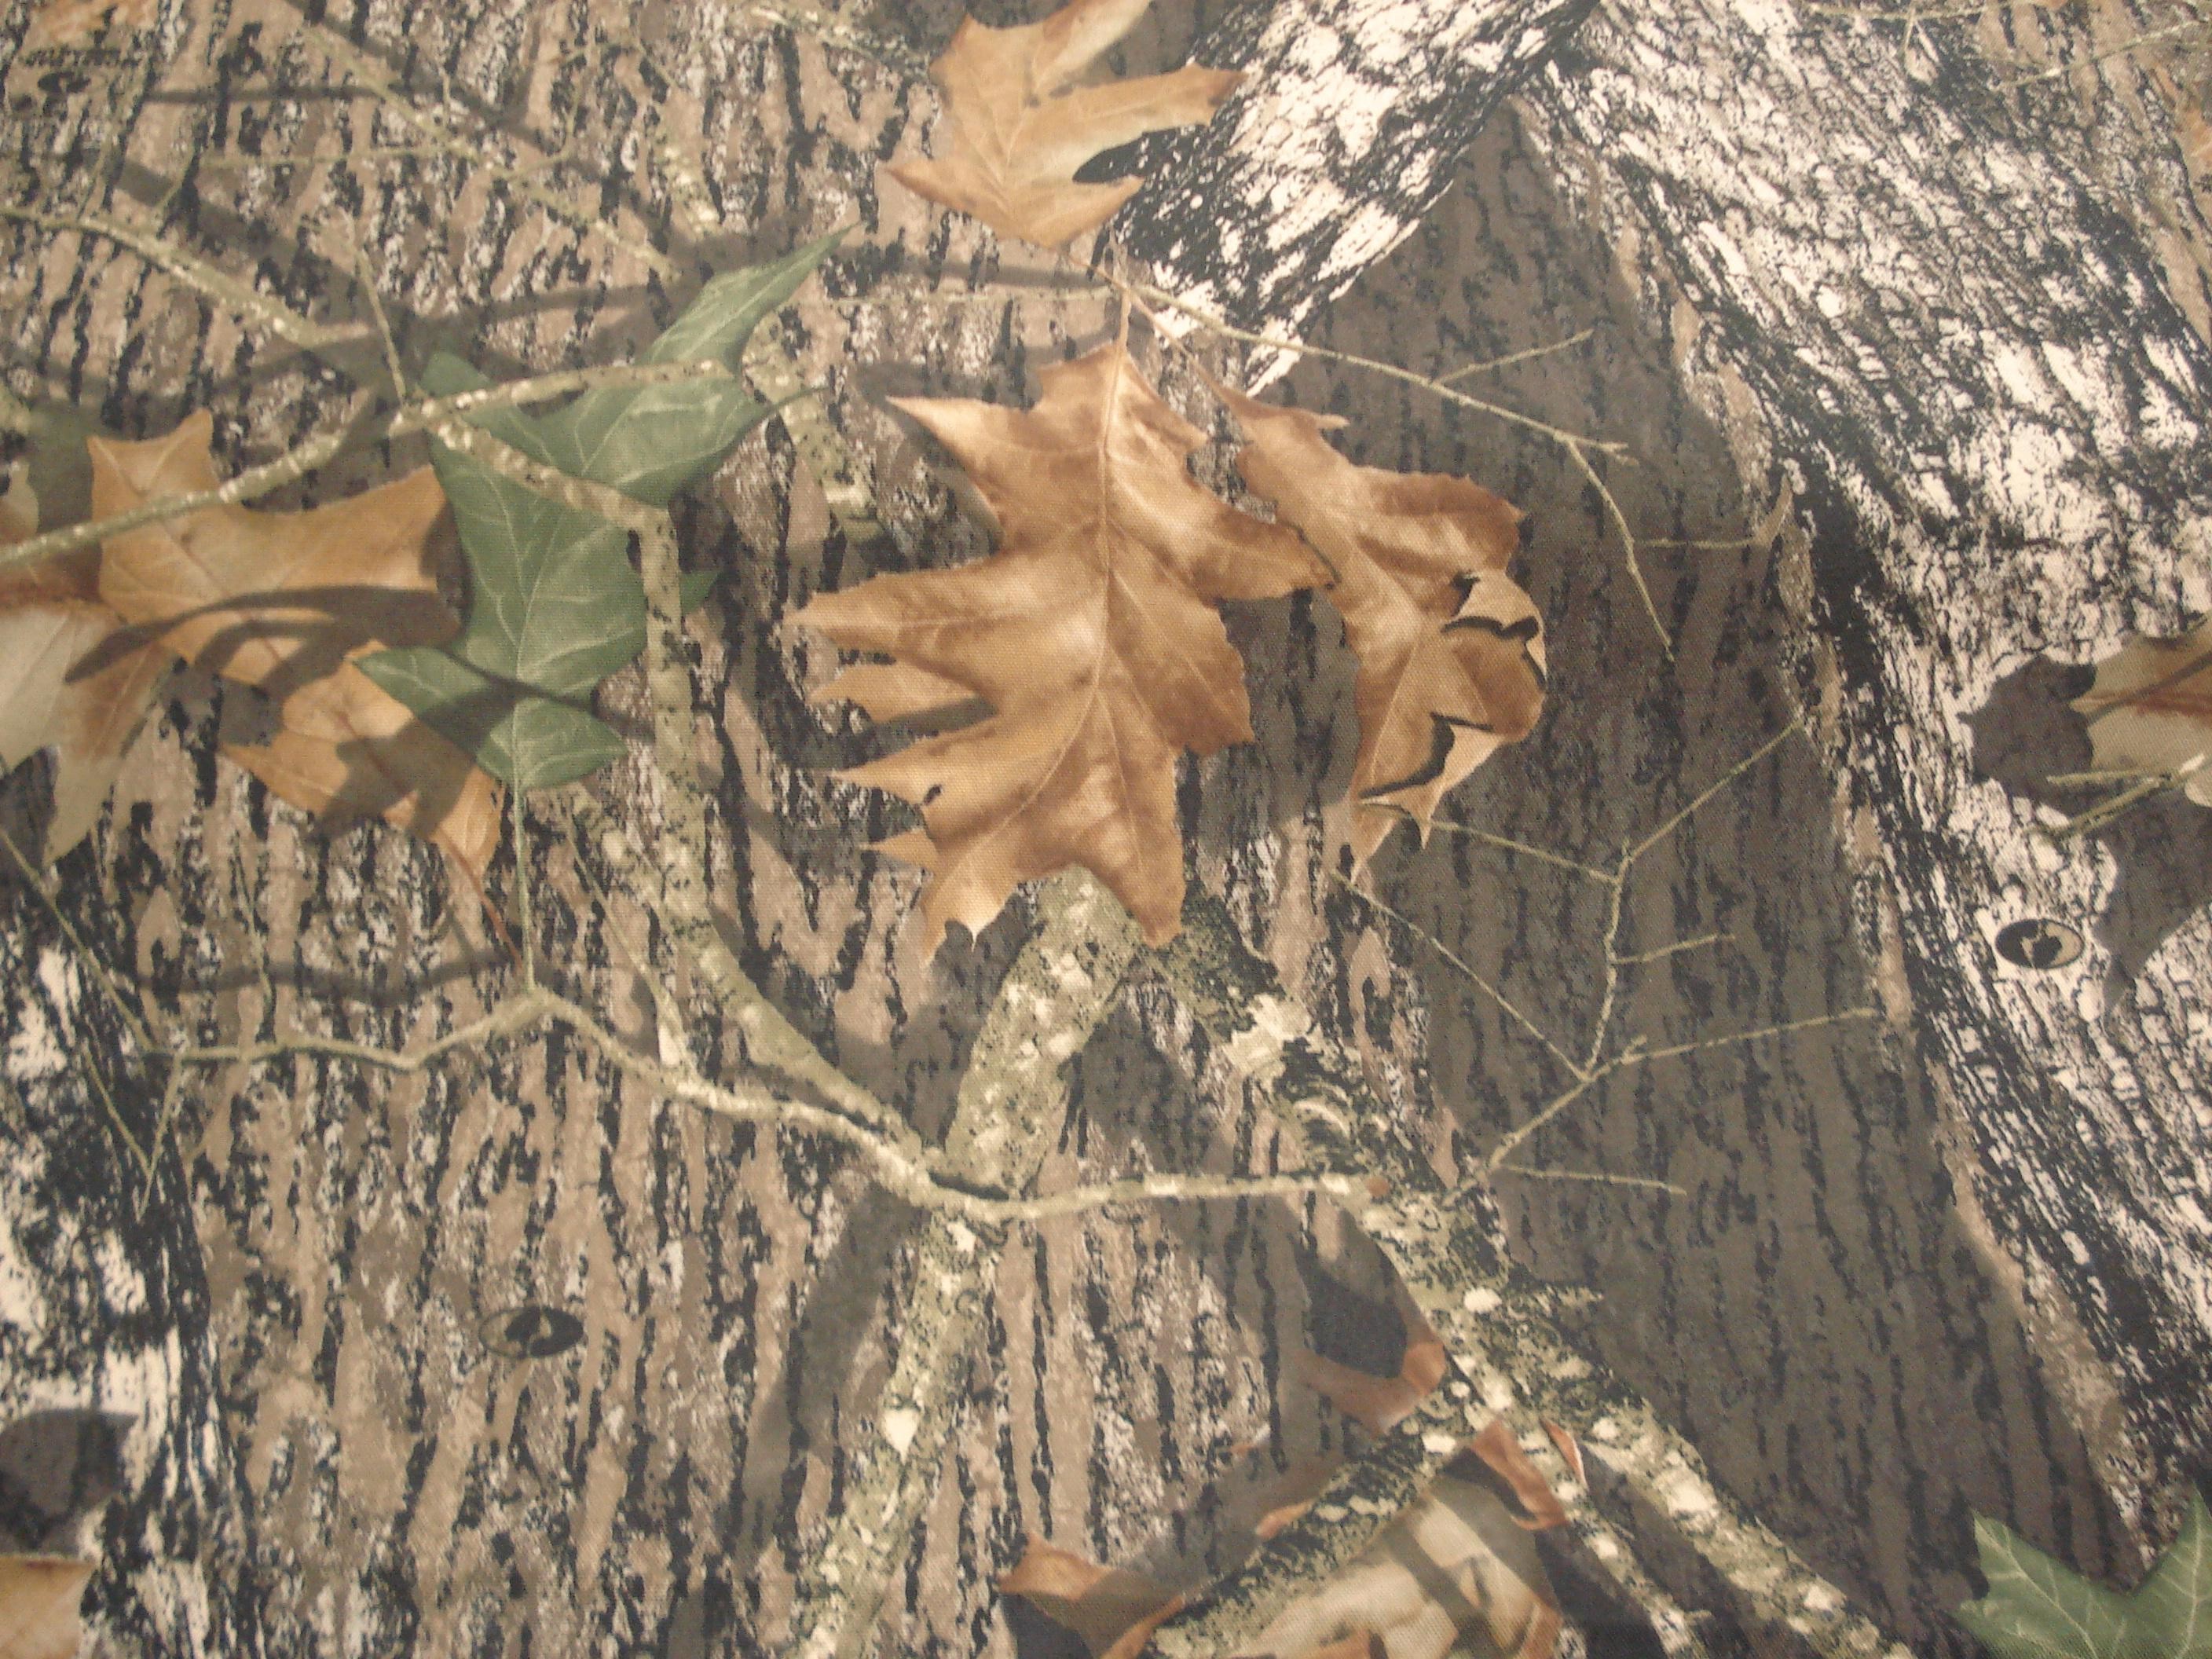 Realtree camouflage hd picture hd wallpapers high definition cool